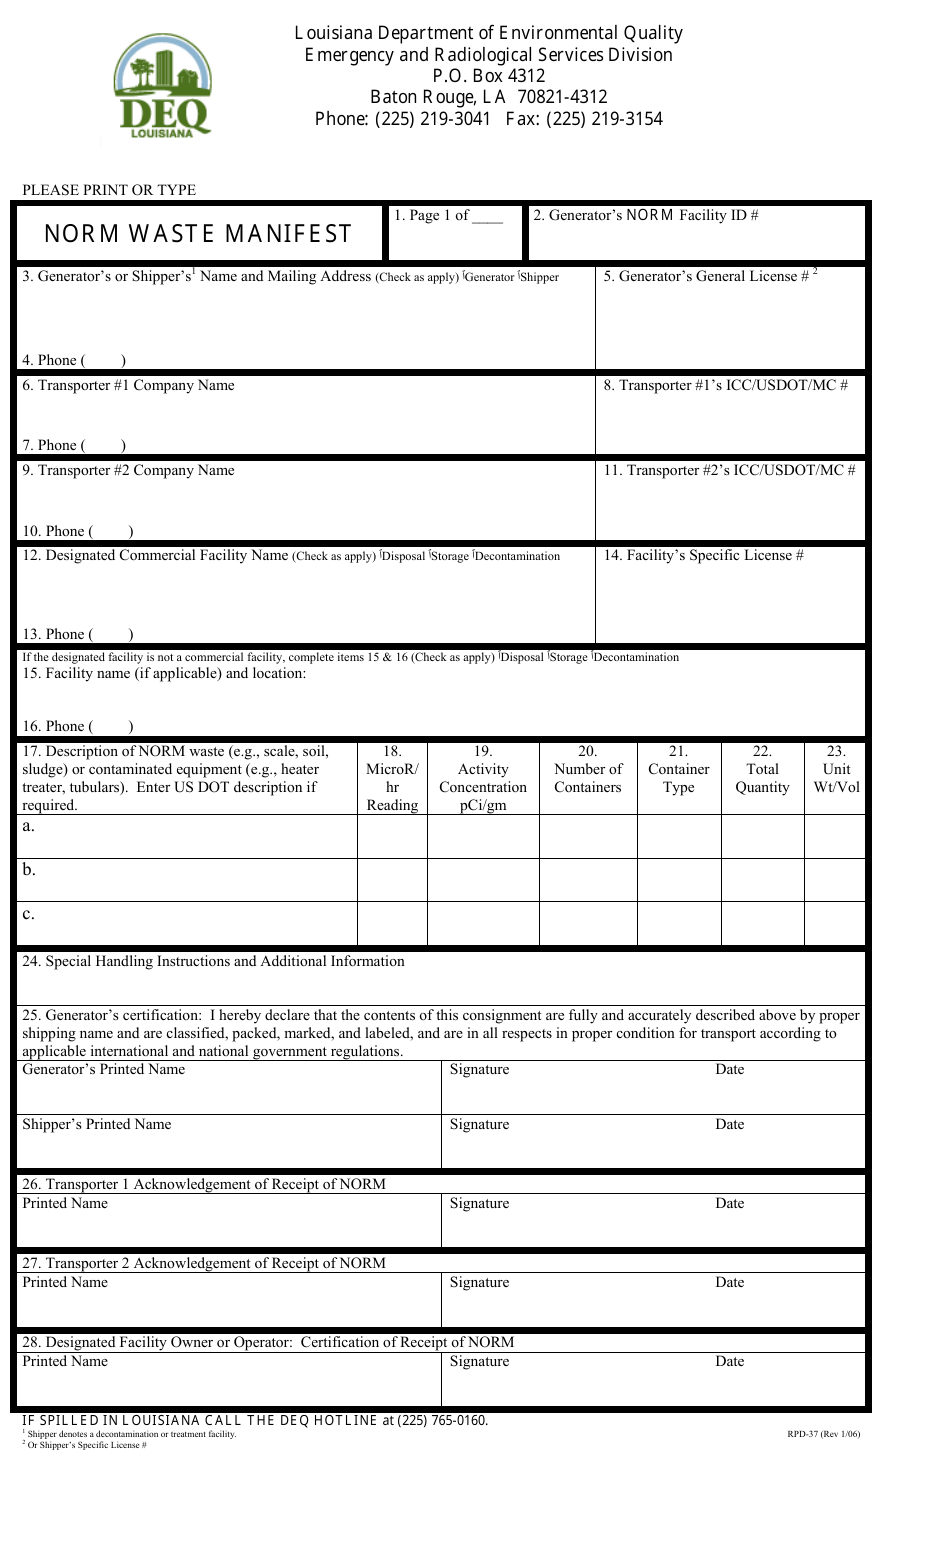 Form RPD-37 Norm Waste Manifest - Louisiana, Page 1